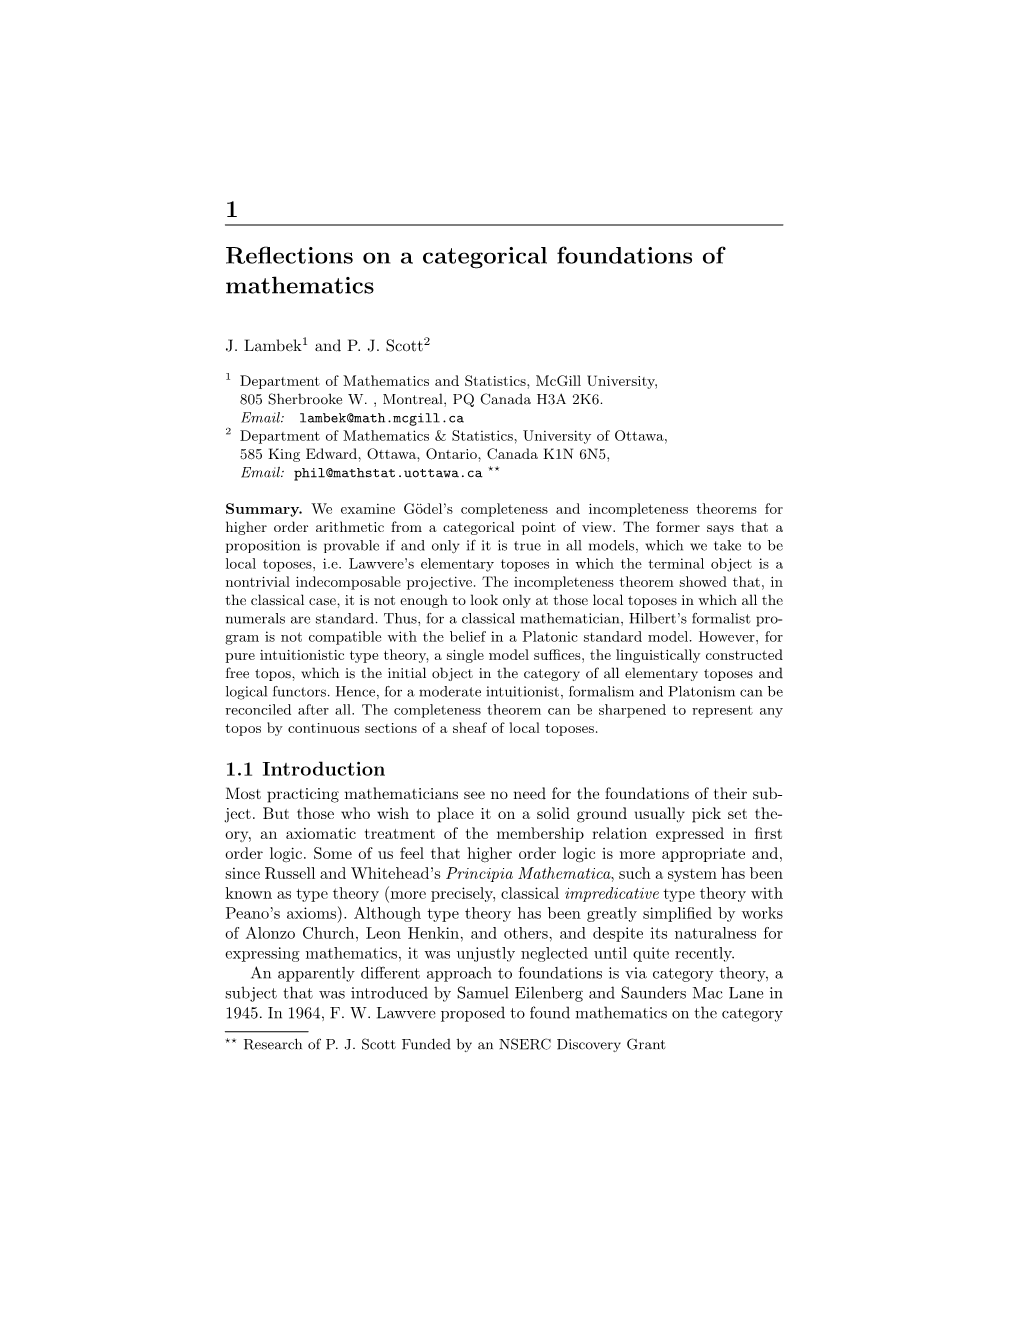 Reflections on a Categorical Foundations of Mathematics